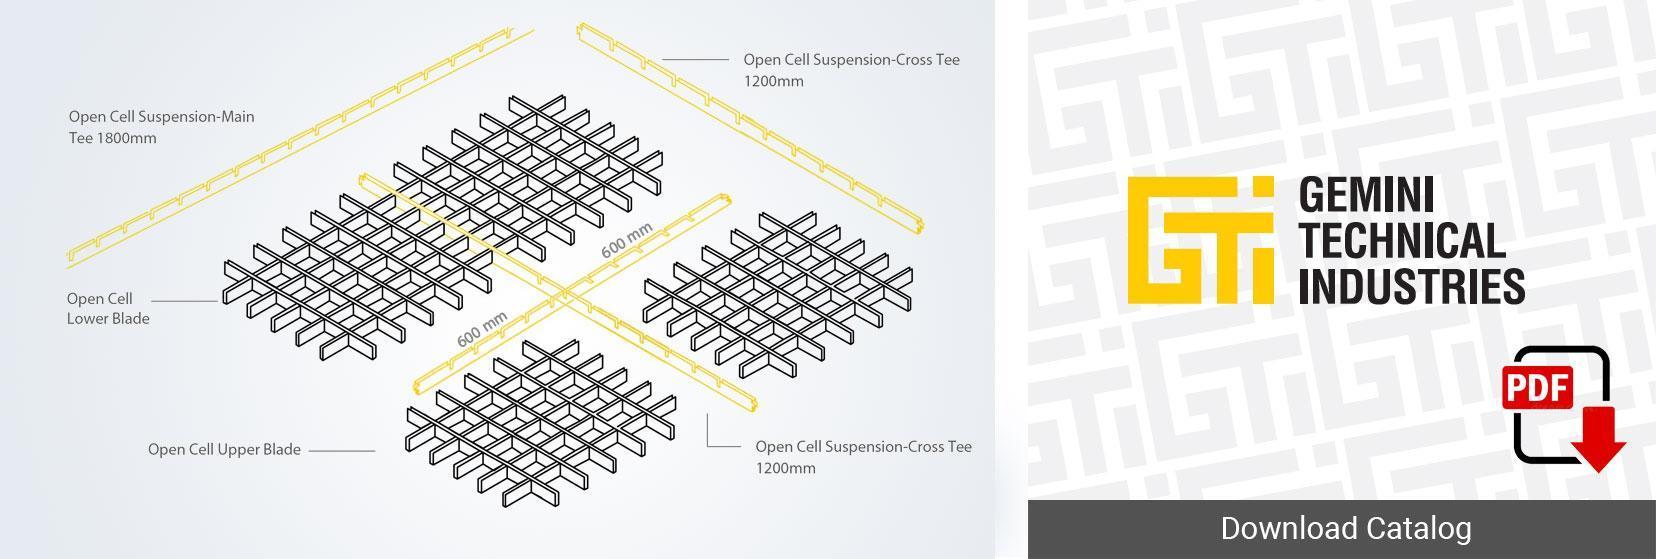 Building material manufacturer | open cell suspension installation